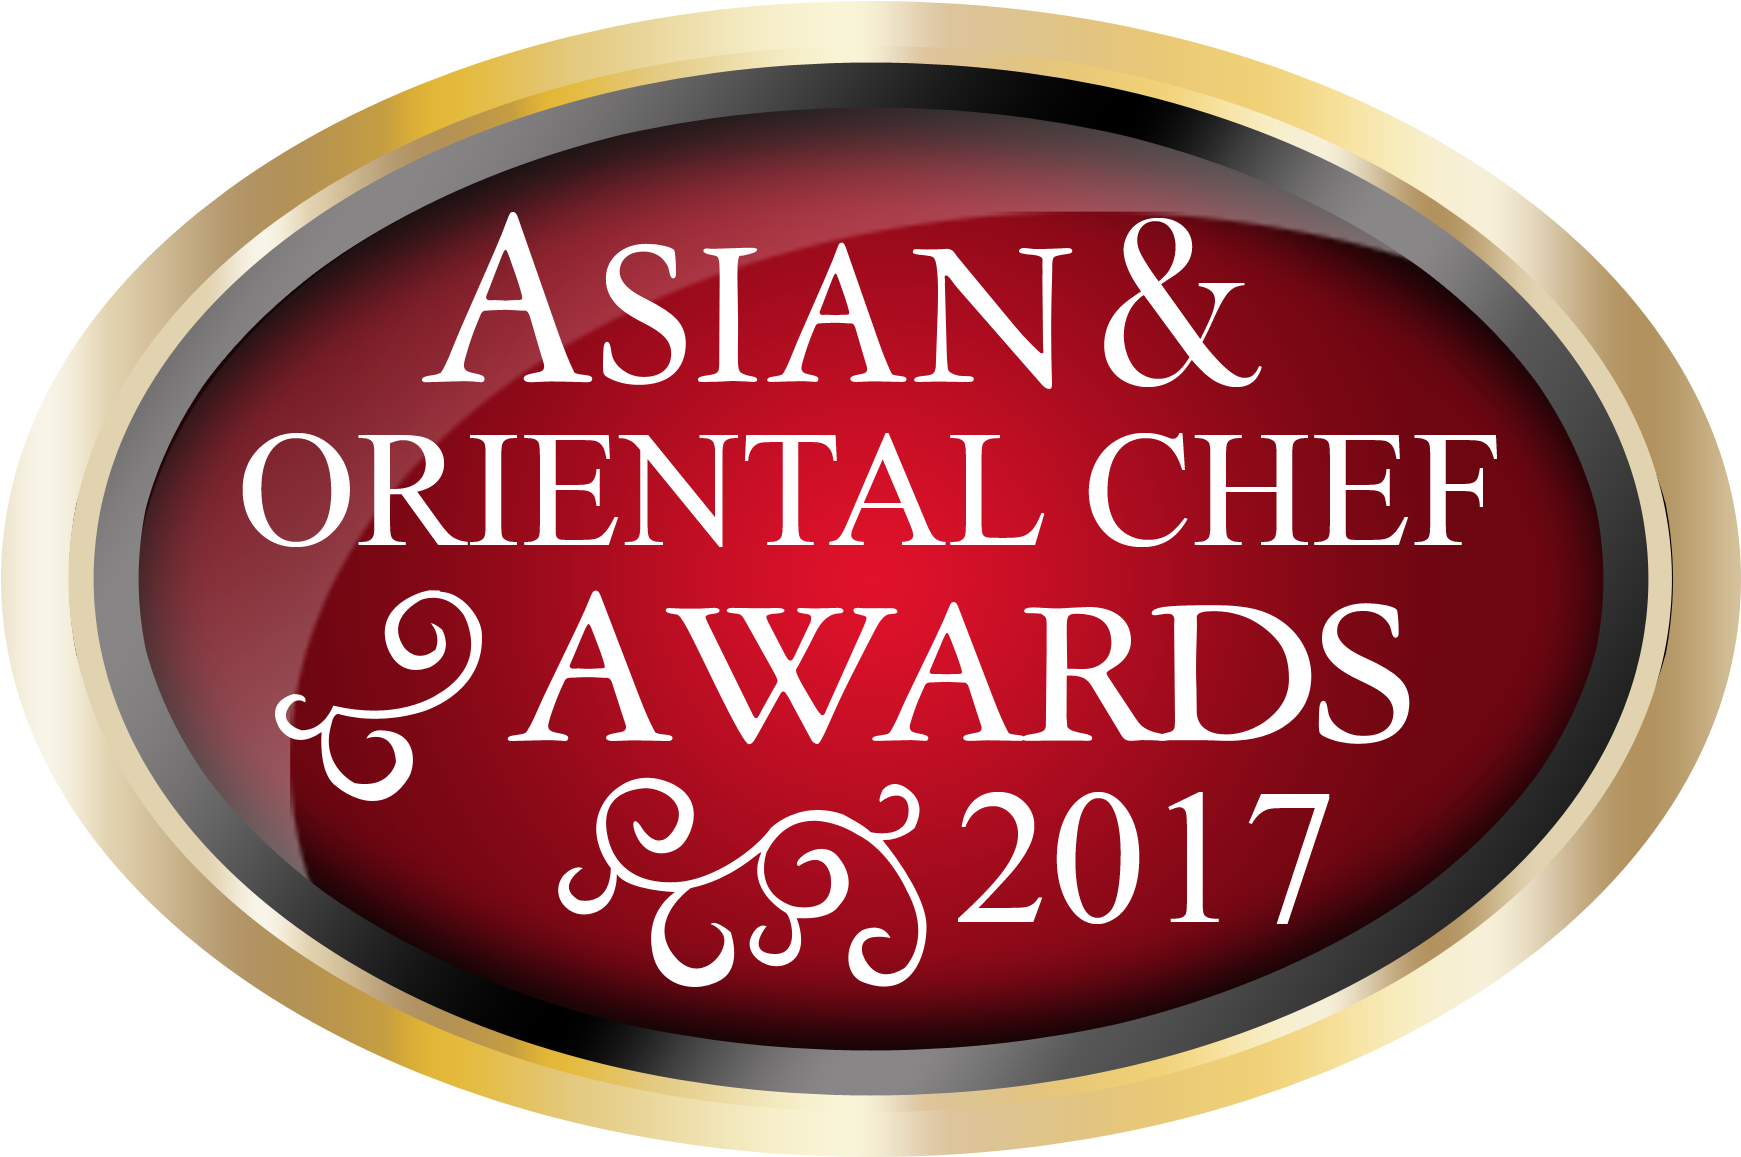 Asian Oriental Chef Awards - Oriole Park At Camden Yards (1772x1200)